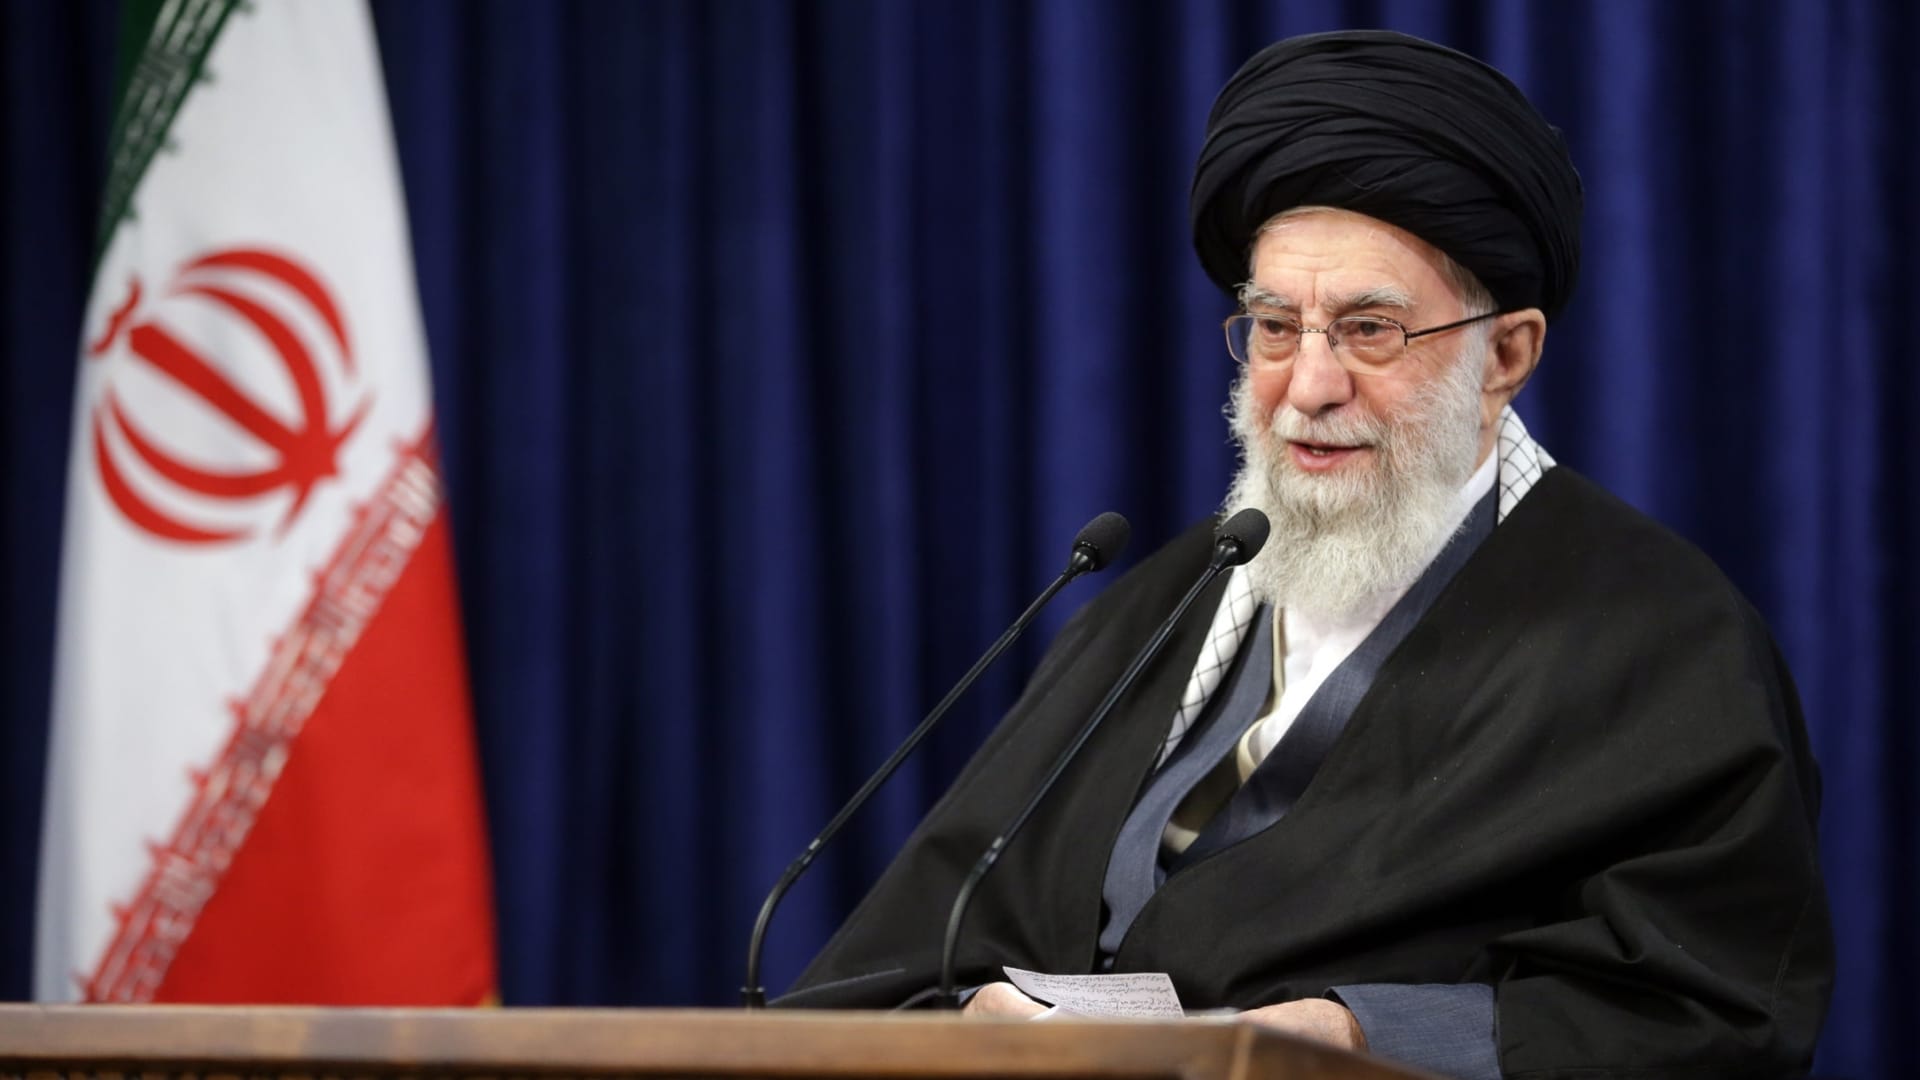 Iranian Supreme Leader Ali Khamenei addresses people via a live broadcast on state television on the occasion of the anniversary of the 1978 Qom protests in Tehran, Iran on January 08, 2021.